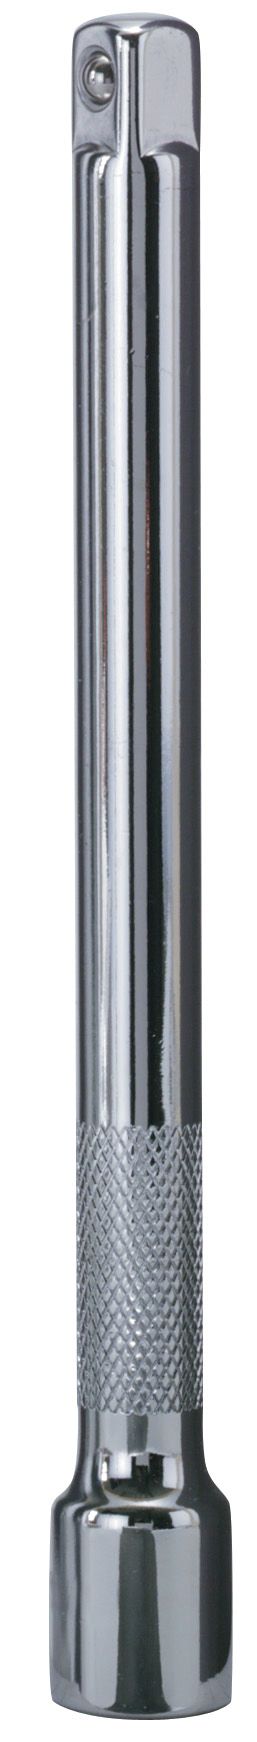 Armstrong Tools 3/8 in. Drive Extension Bar, 8 in. Long